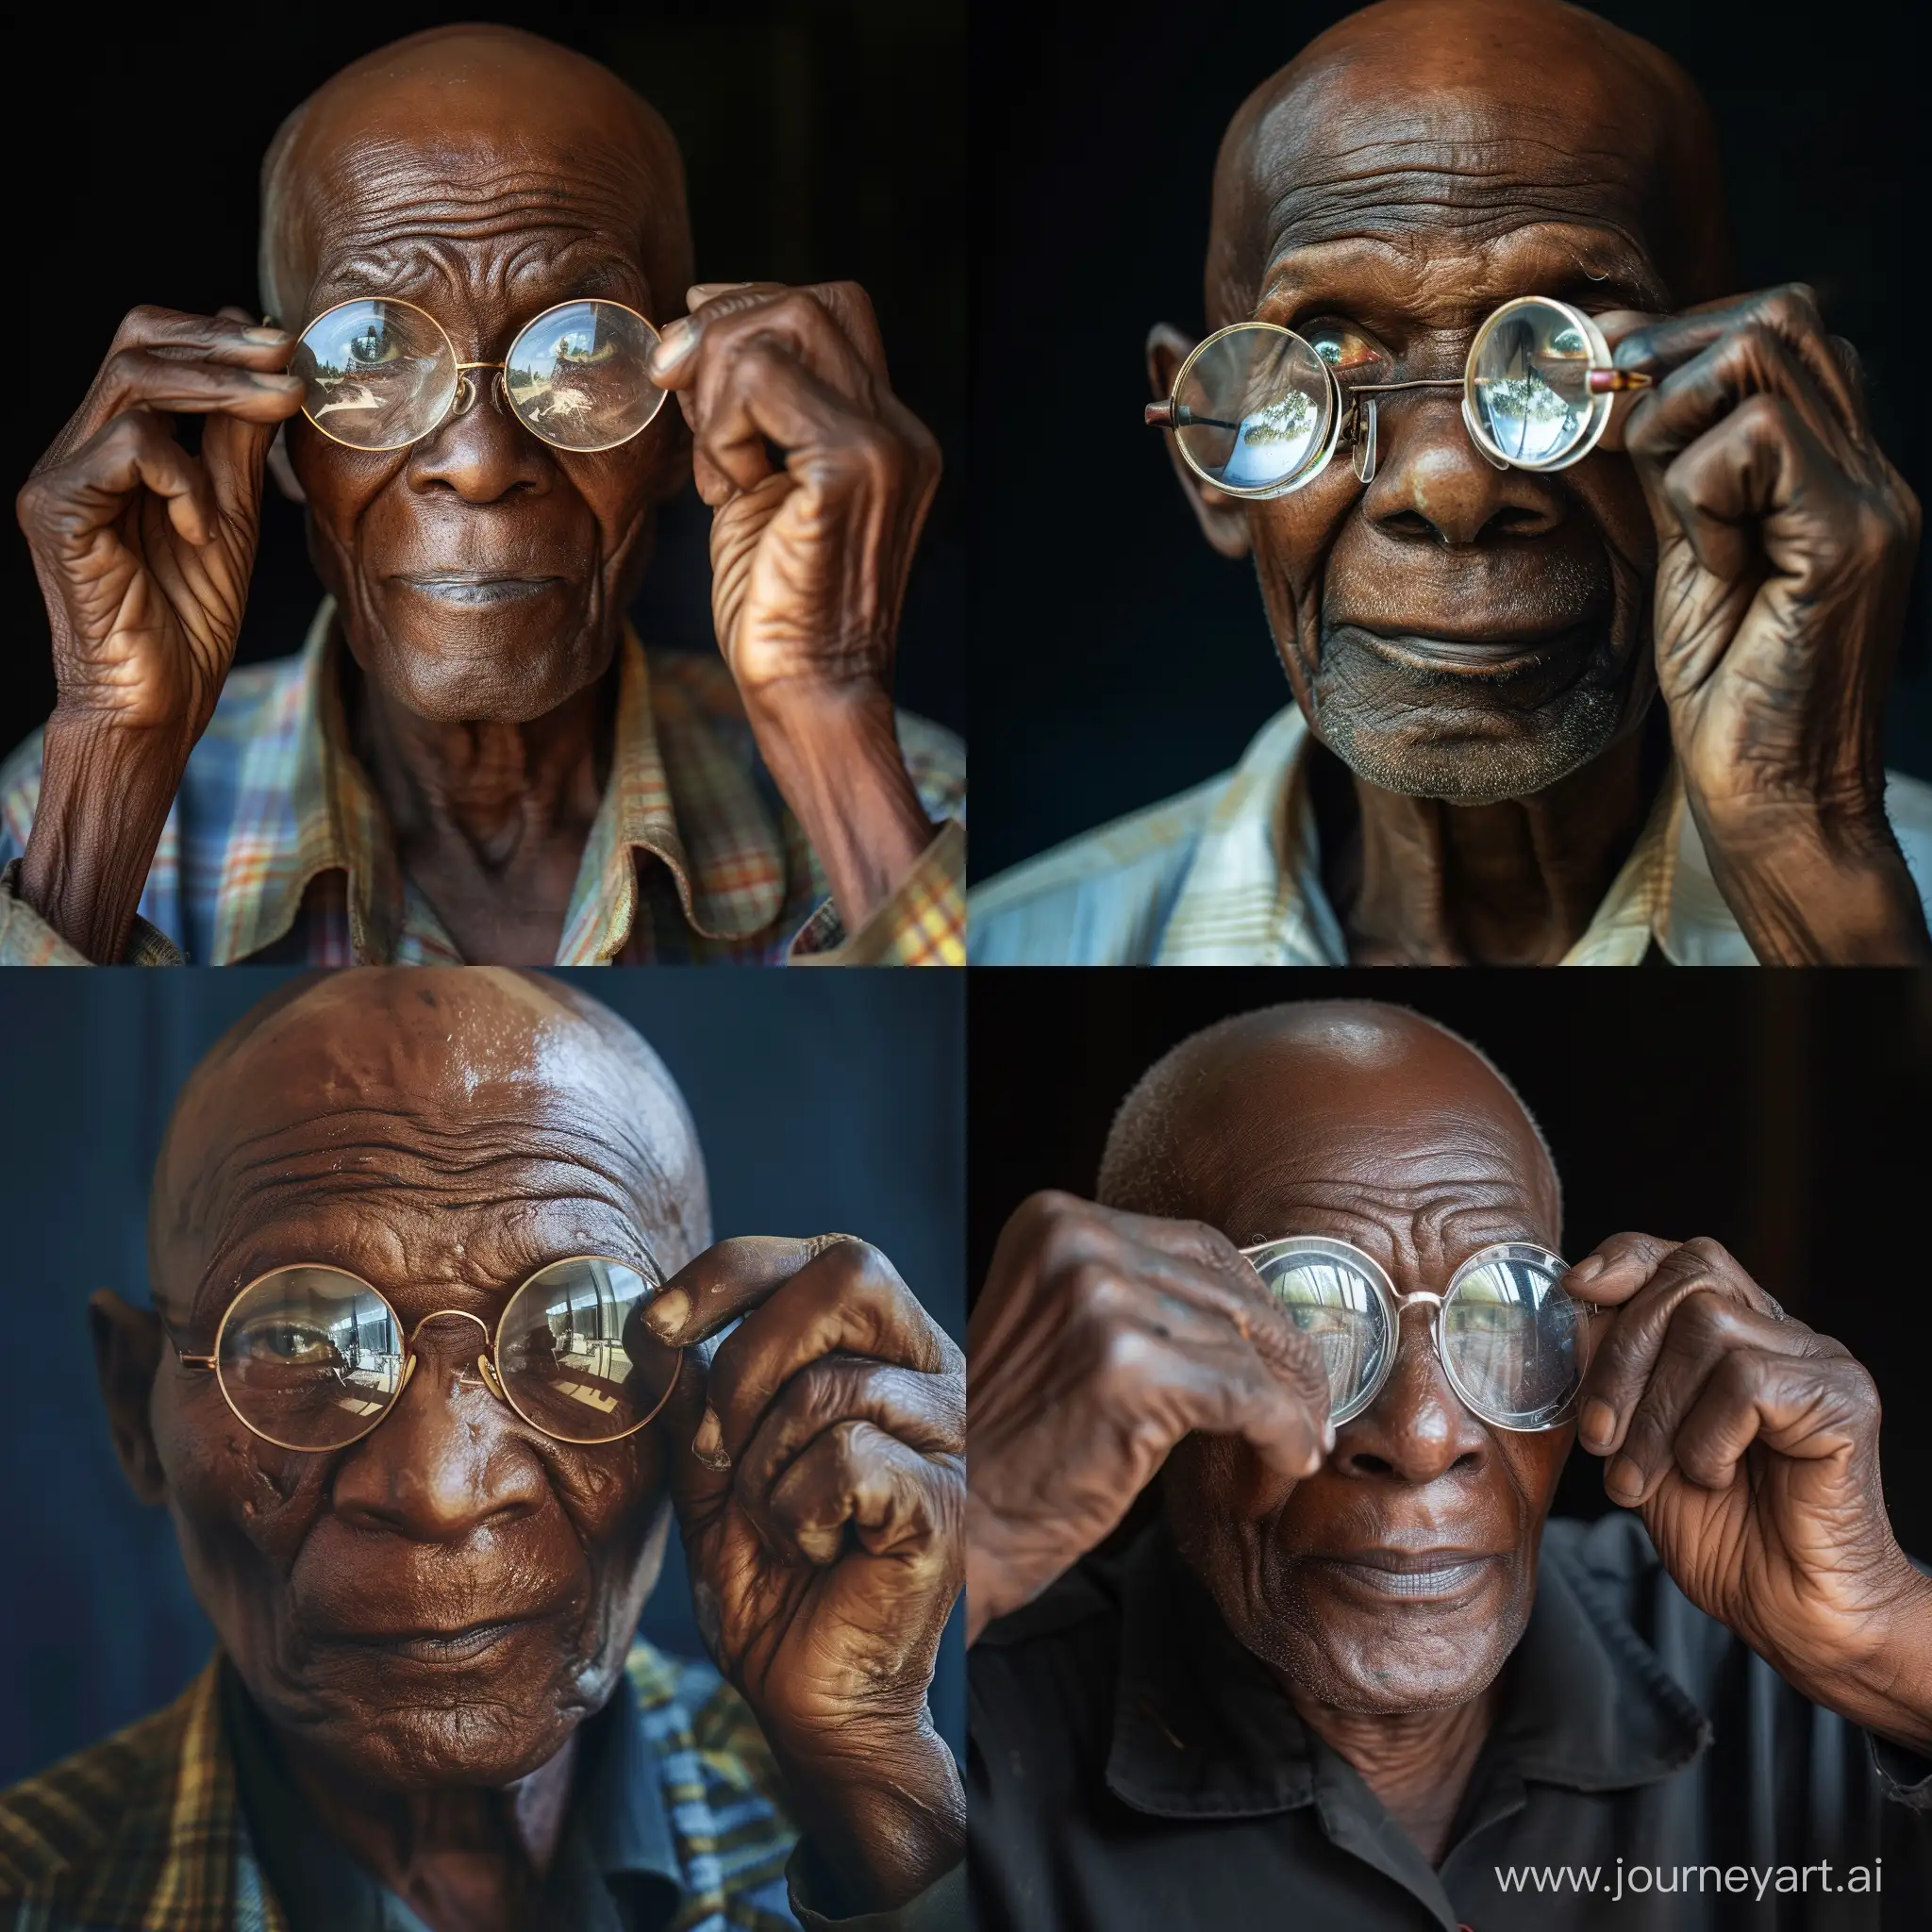 Old bald African man adjusting his old clear and reflective round reading glasses.